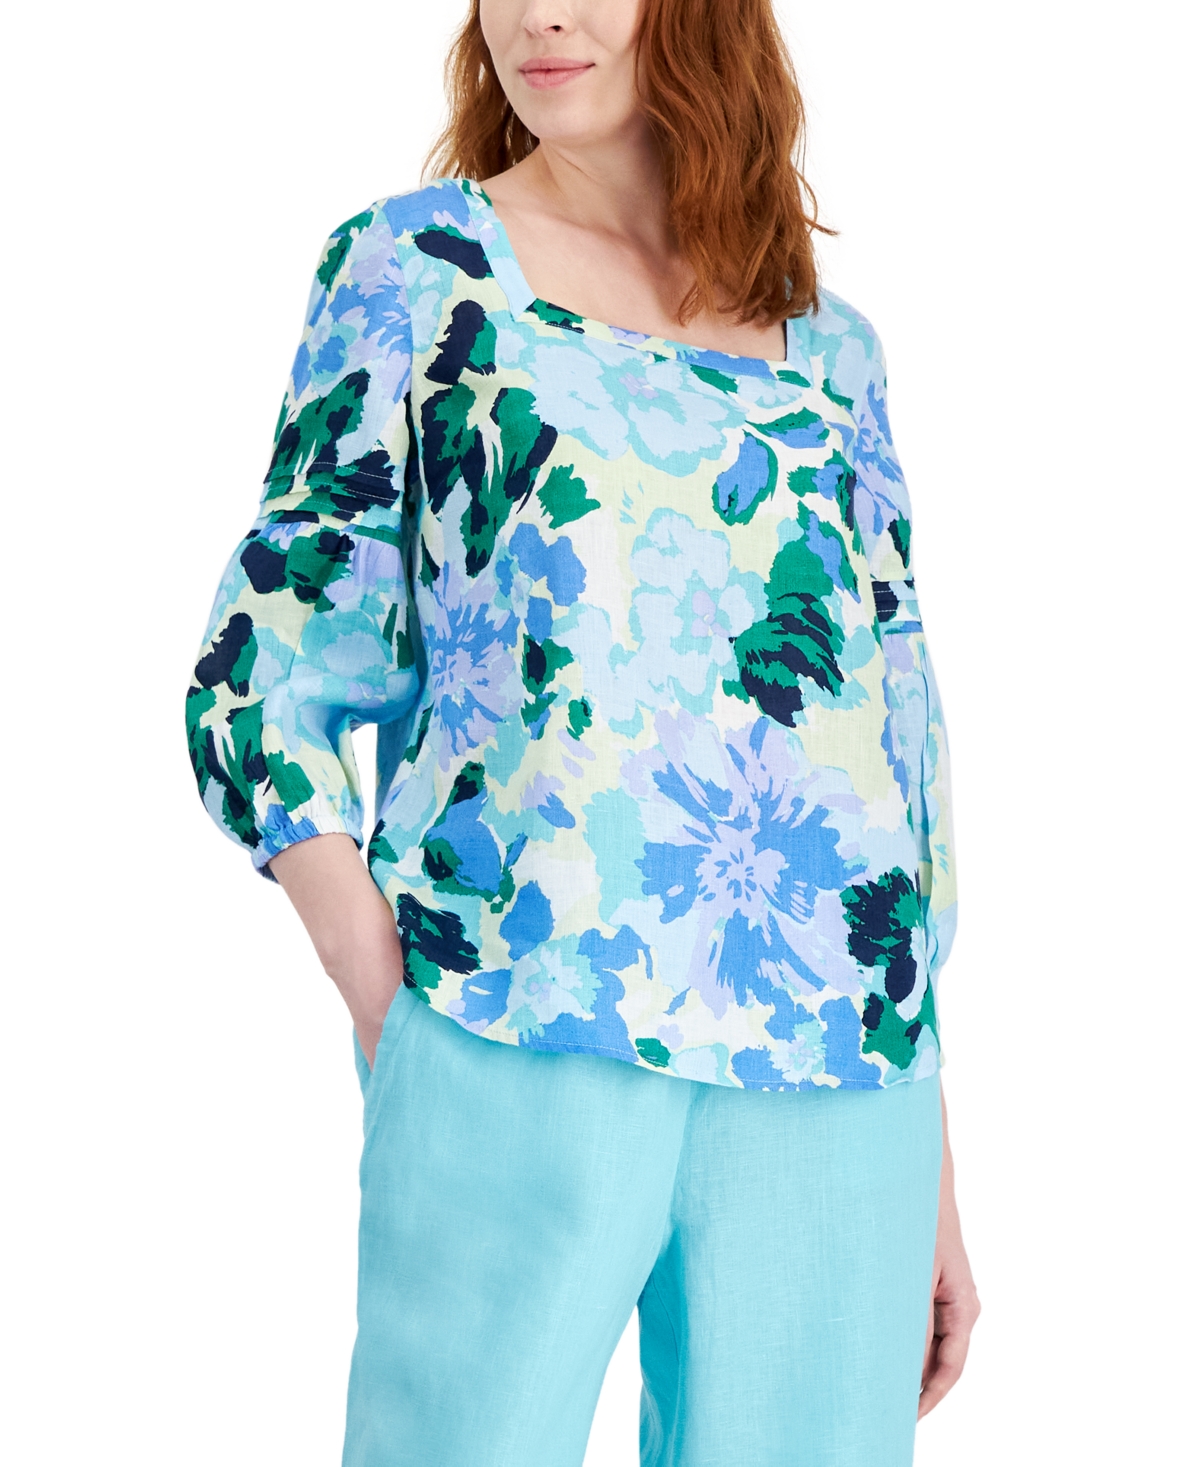 Women's 100% Linen Printed Square-Neck Top, Created for Macy's - Light Pool Blue Combo